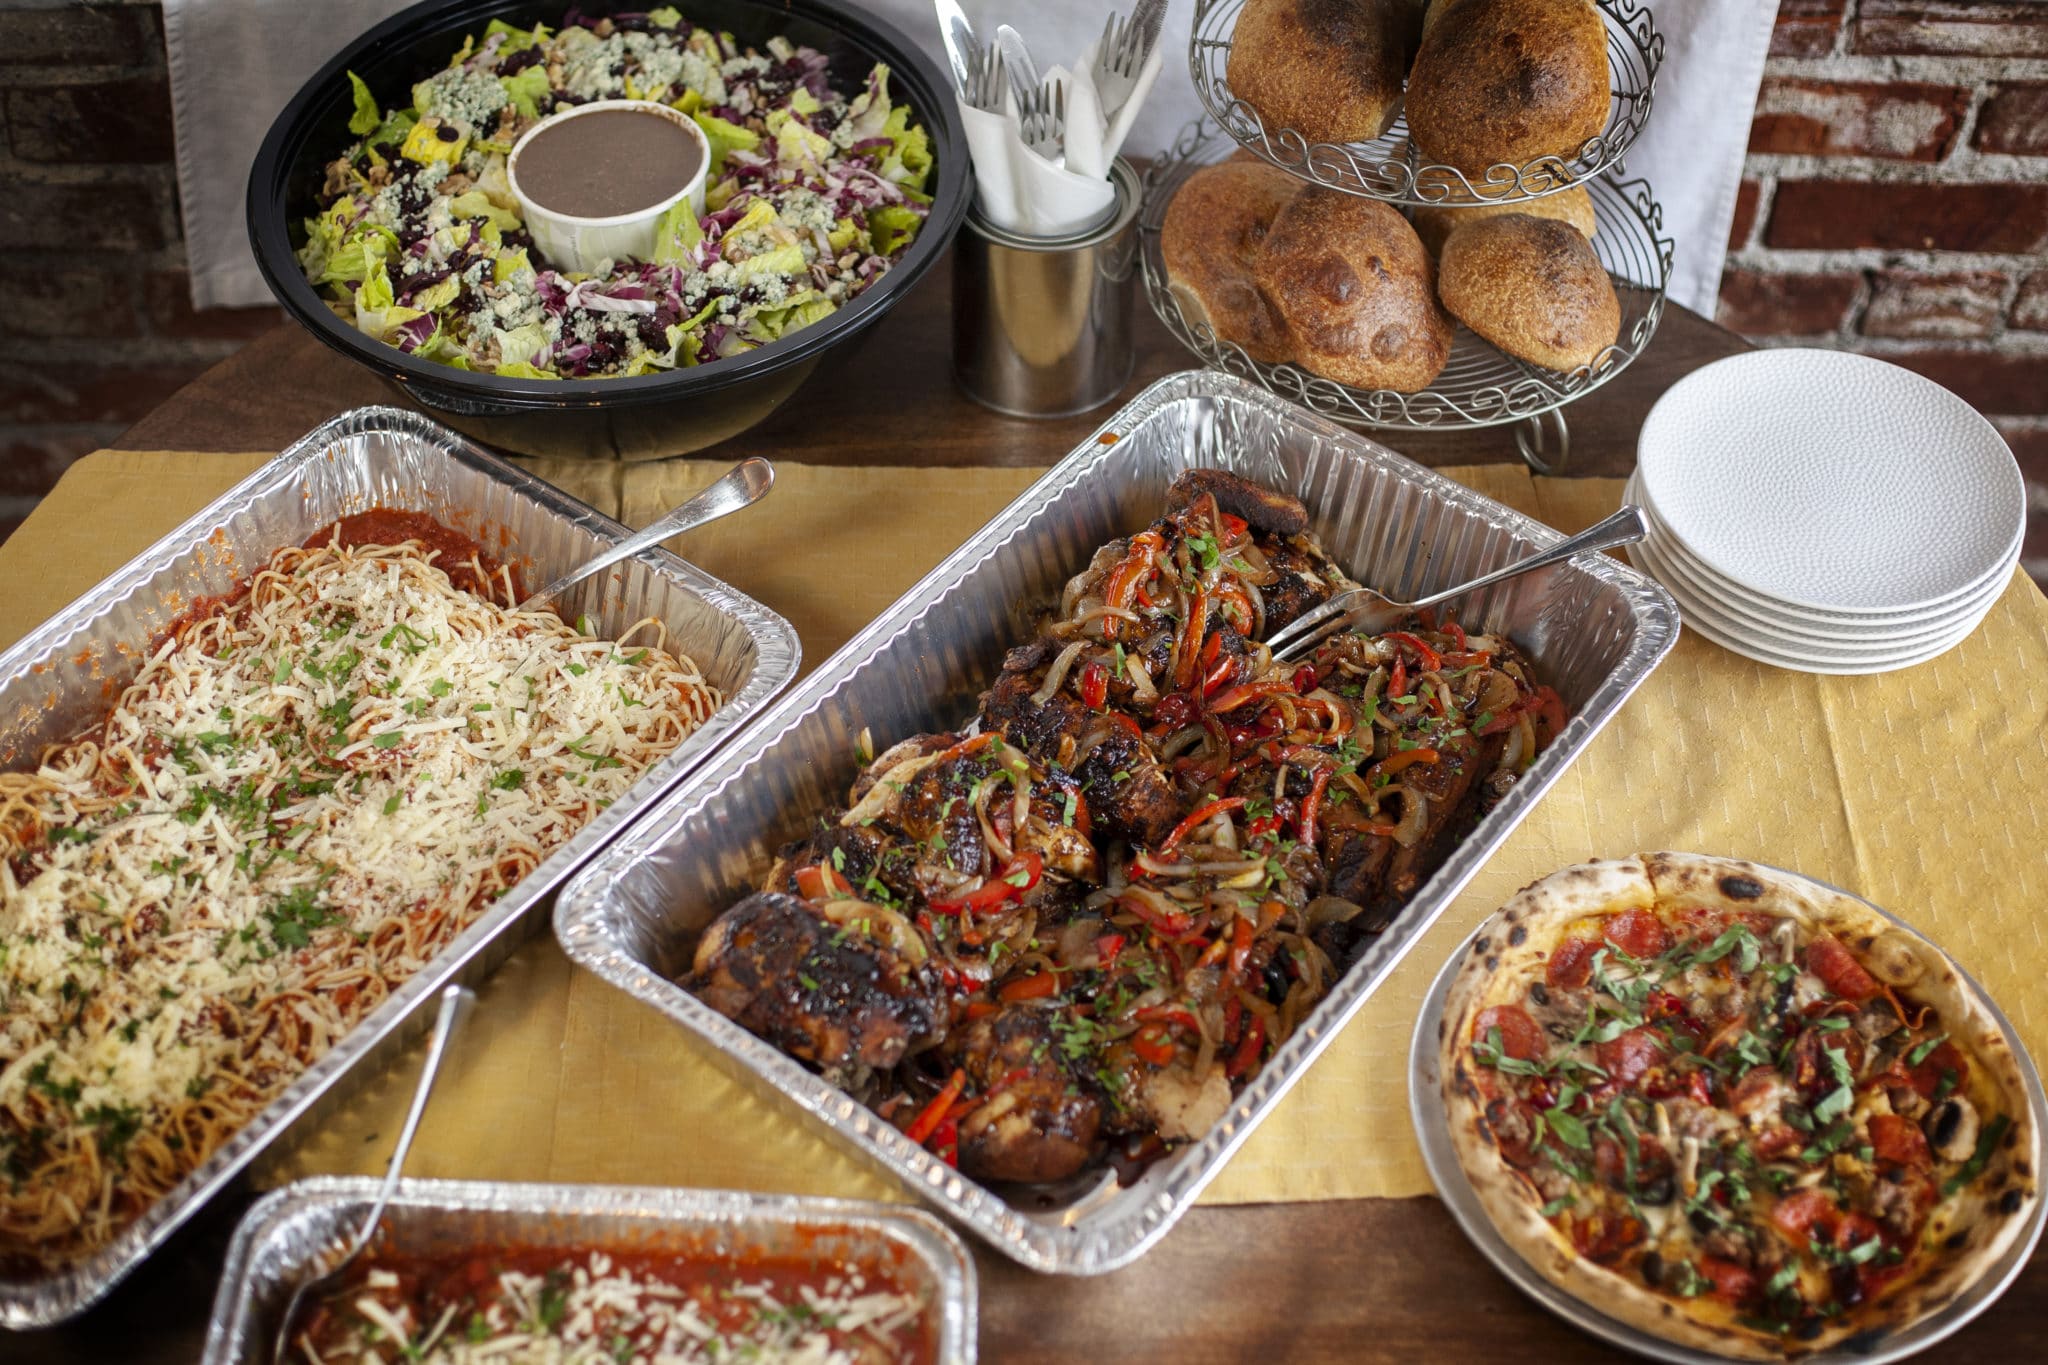 pasta, chicken, salads in catering trays on table